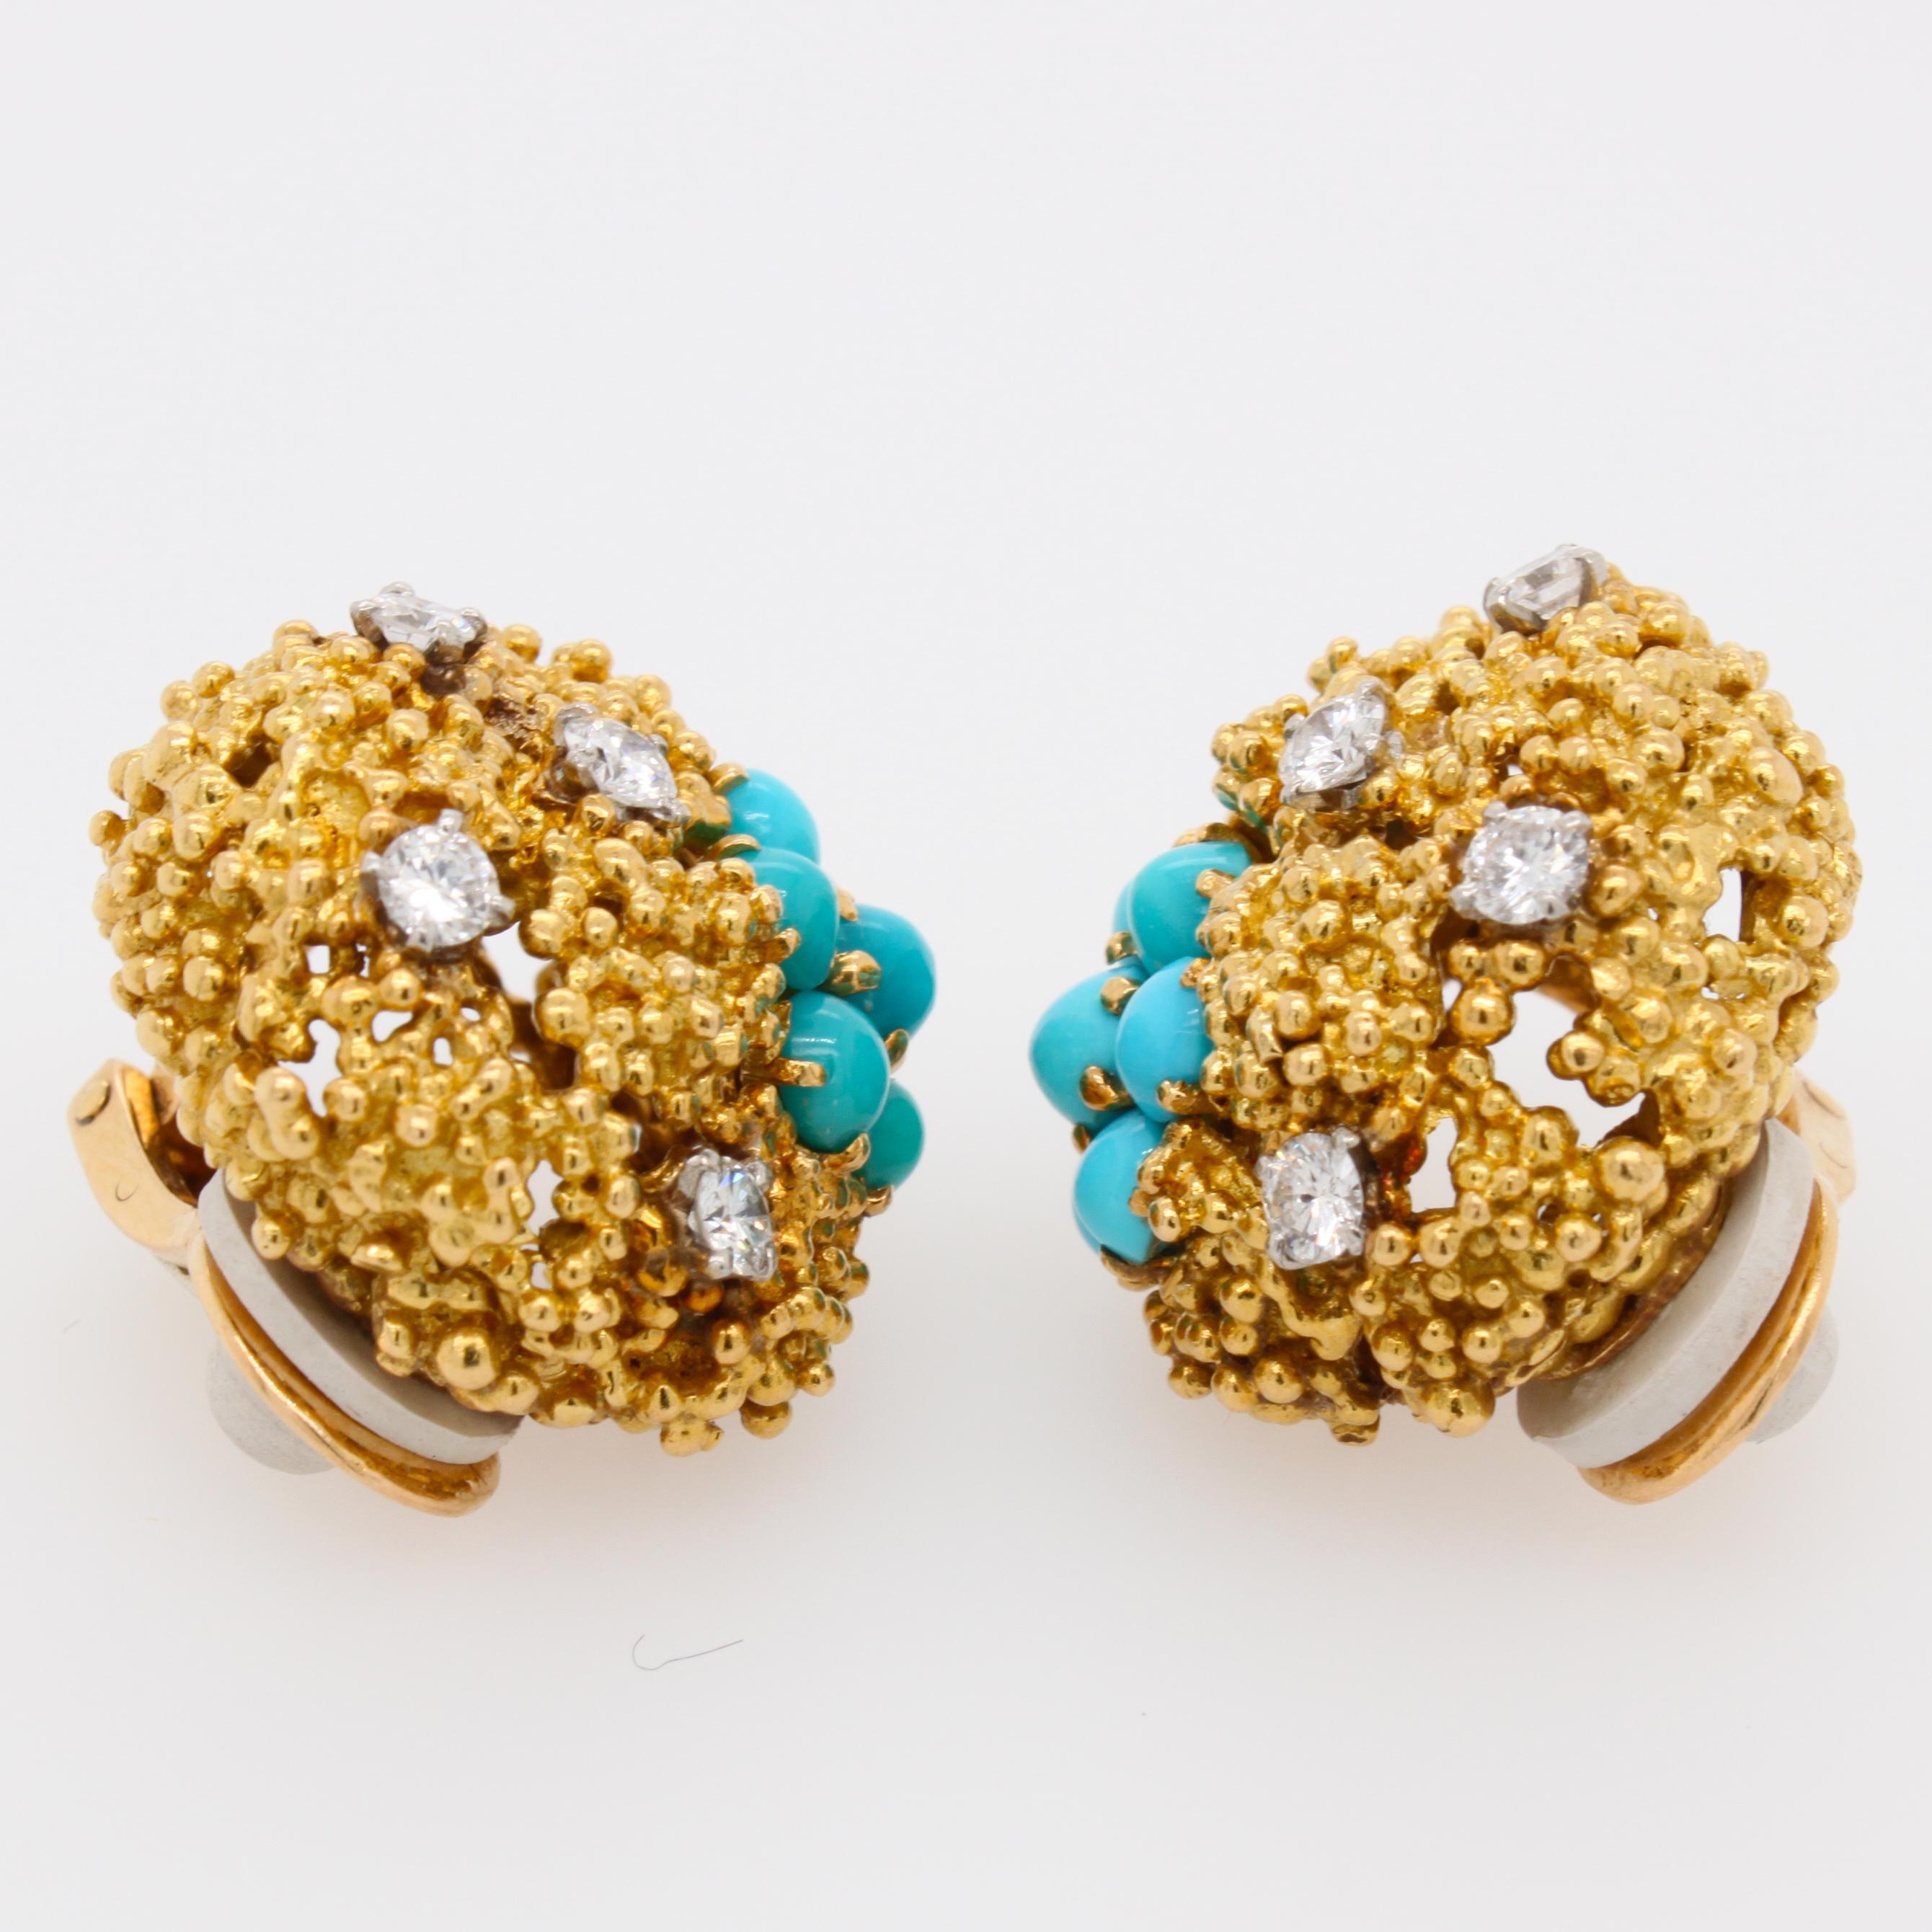 Gold nugget earrings with diamonds and turquoise by Boucheron, 1940s. The earrings have a very chic design, each with a cluster of 7 small turquoise cabochons and 5 round brilliant cut diamonds, set in 18k yellow gold. The craftsmanship and